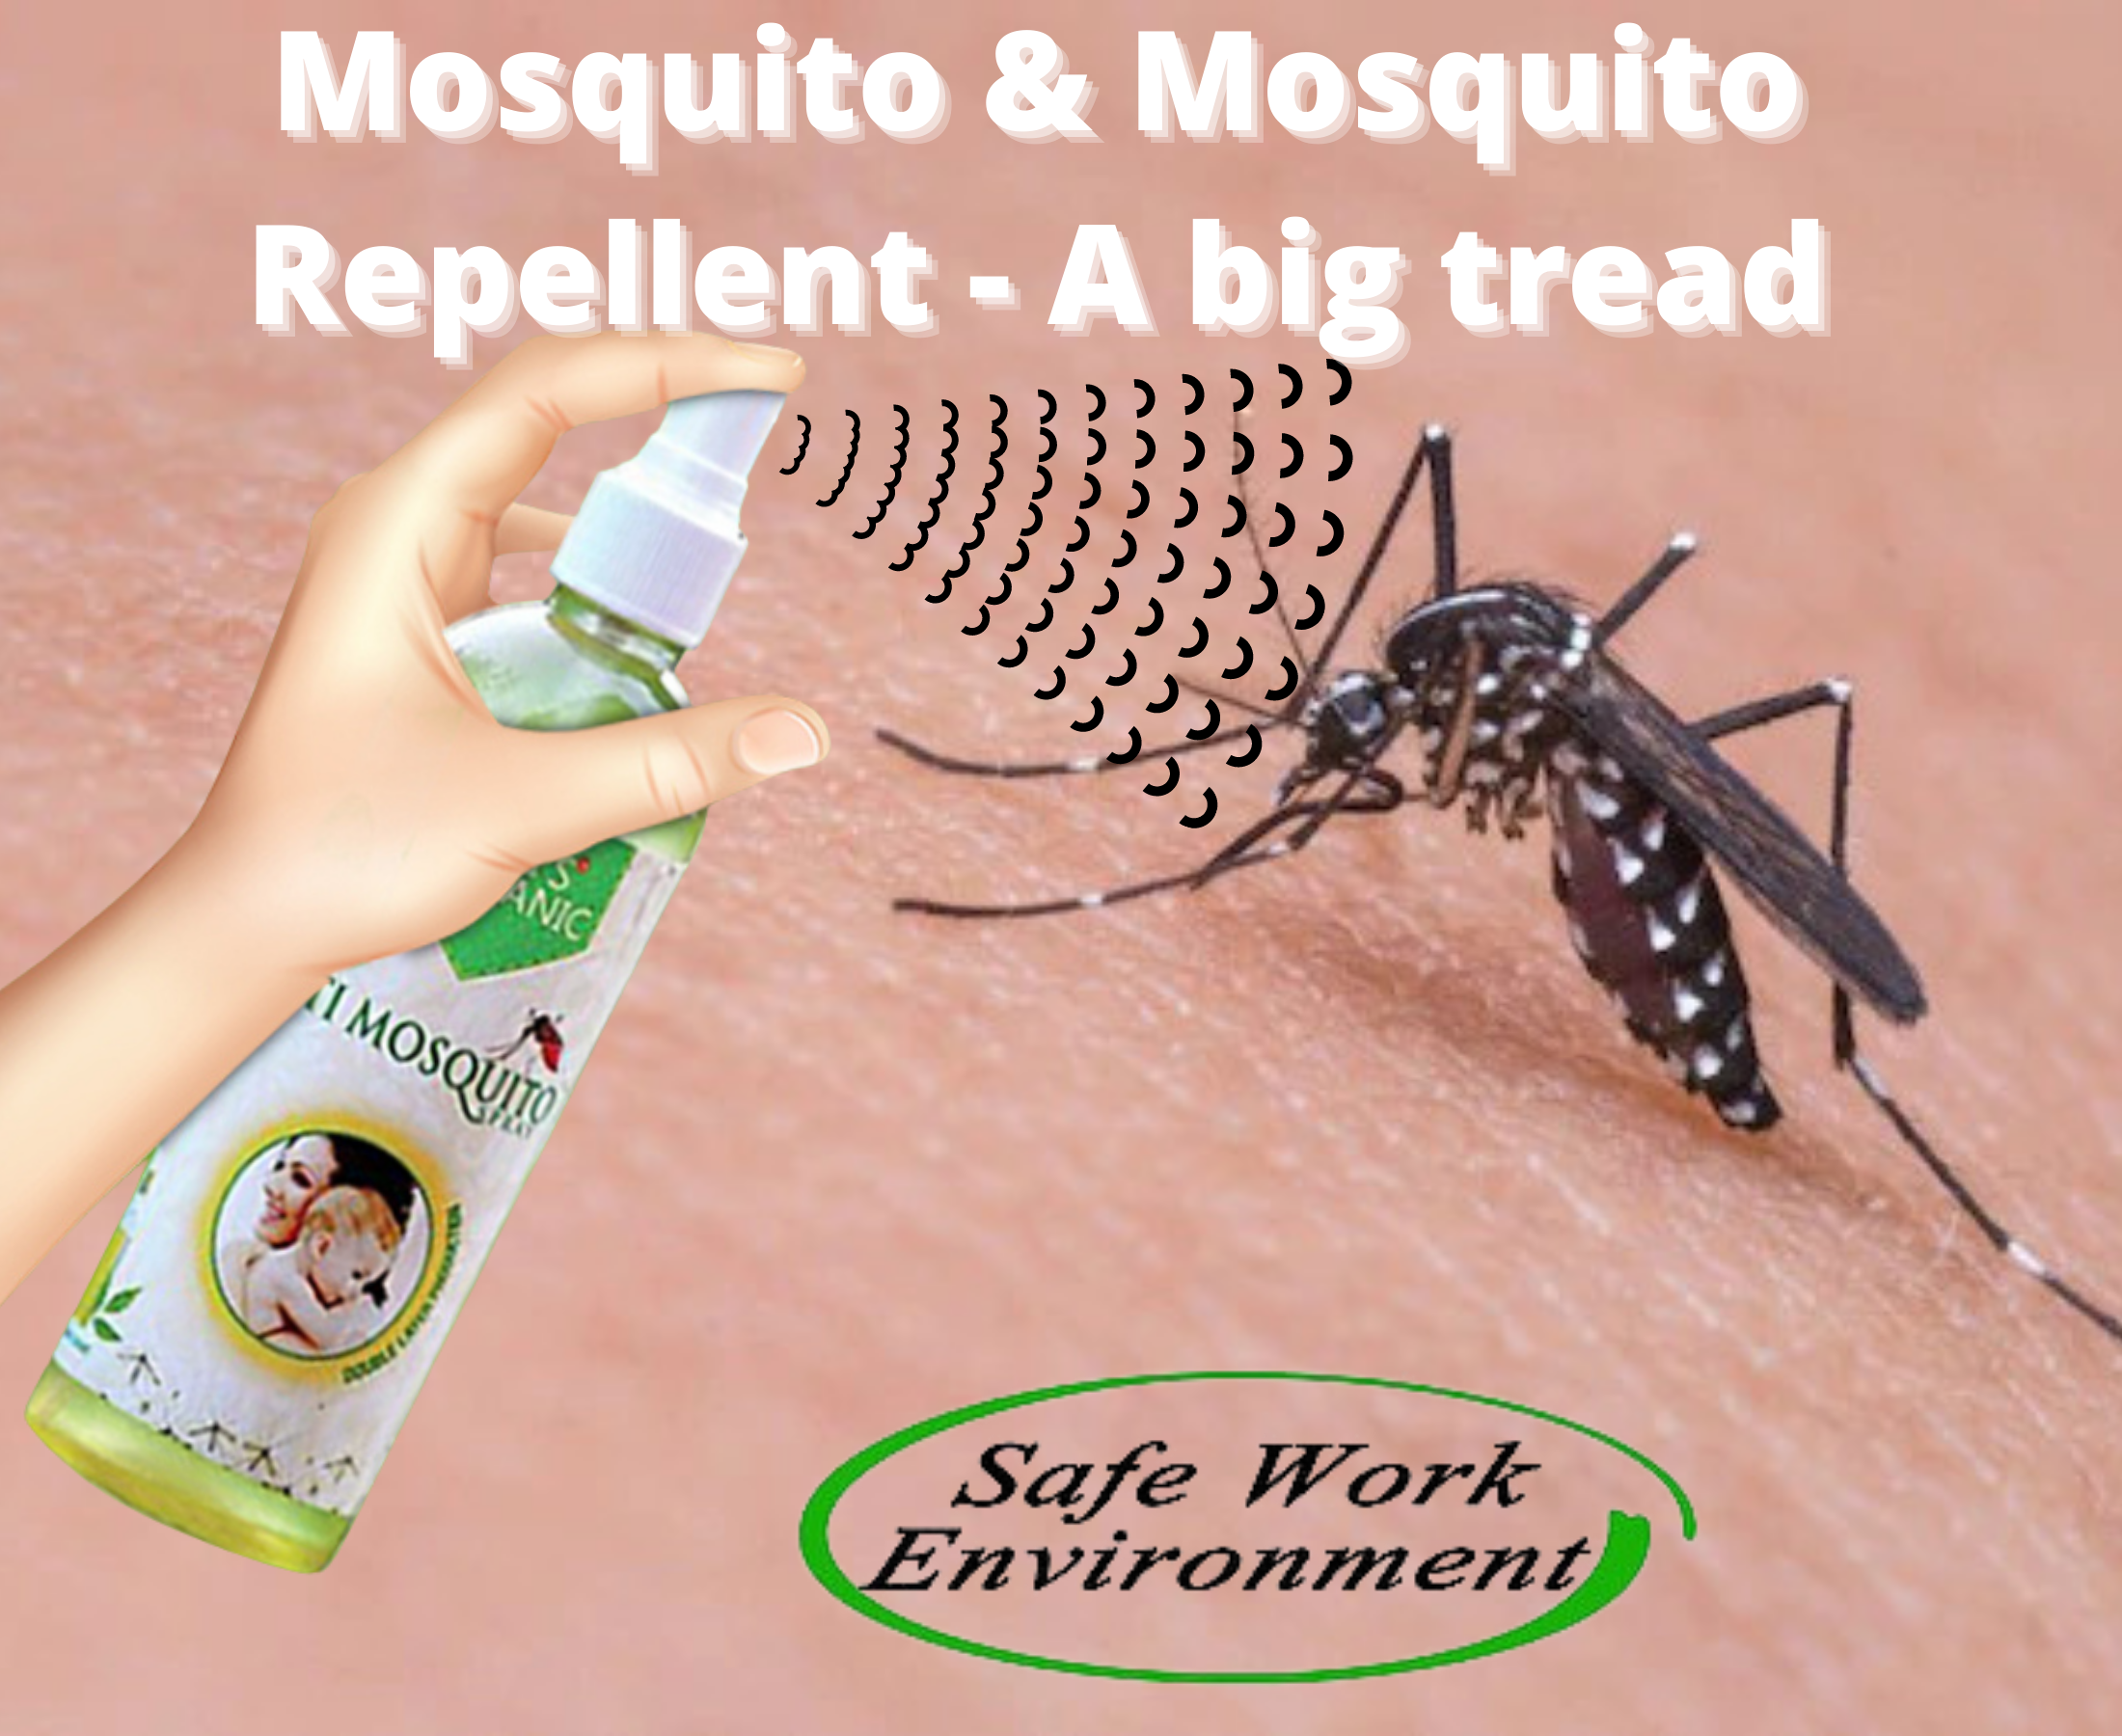 Important tips to save yourself from mosquito and mosquito repellent